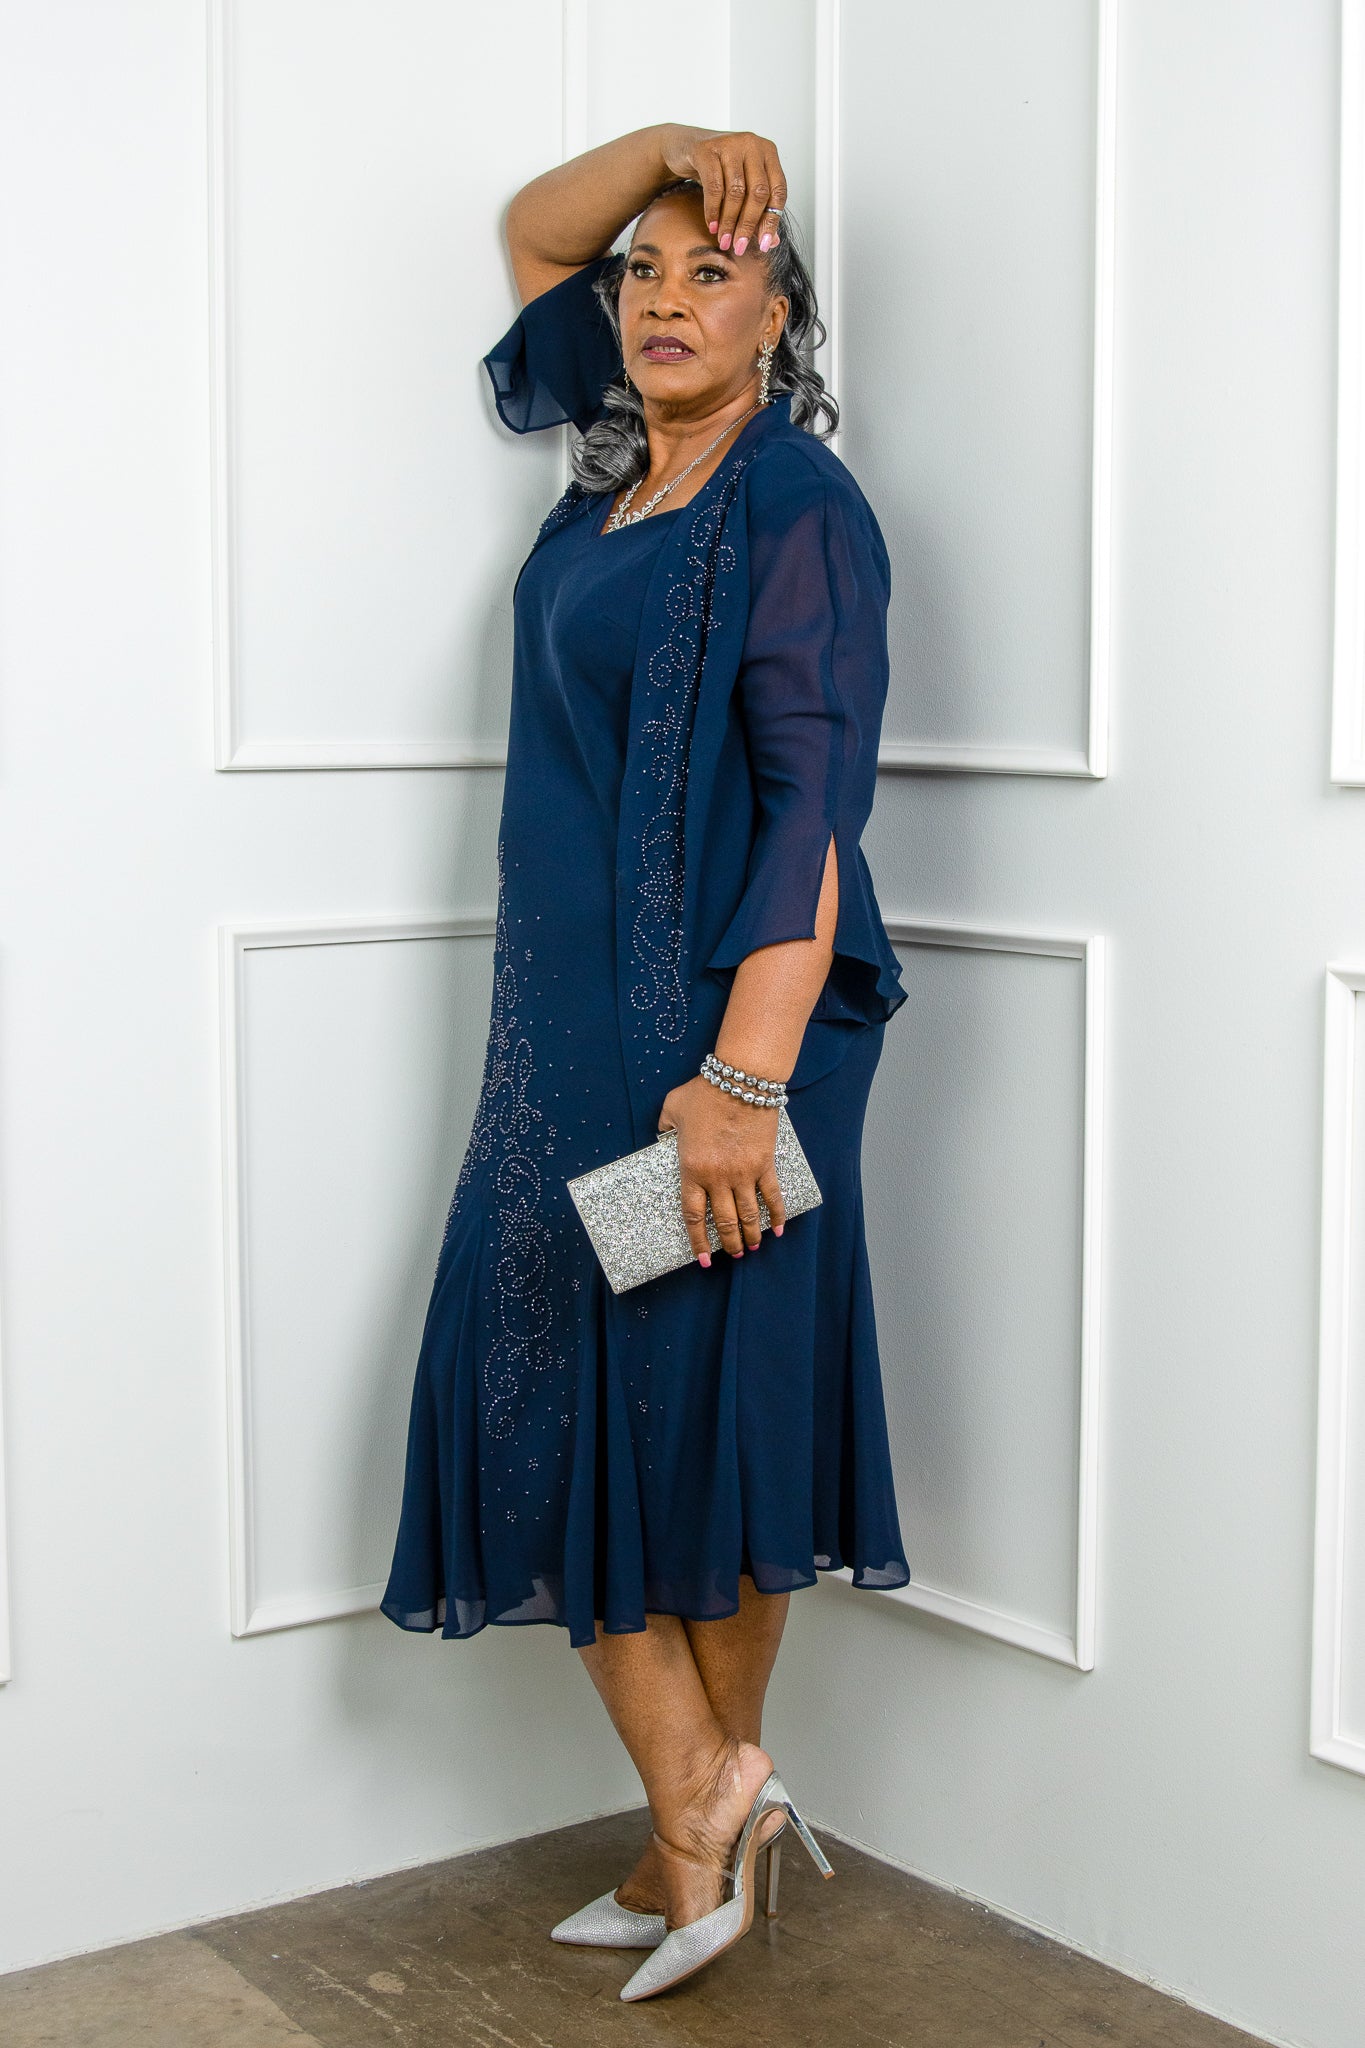 mother of the bride dress navy